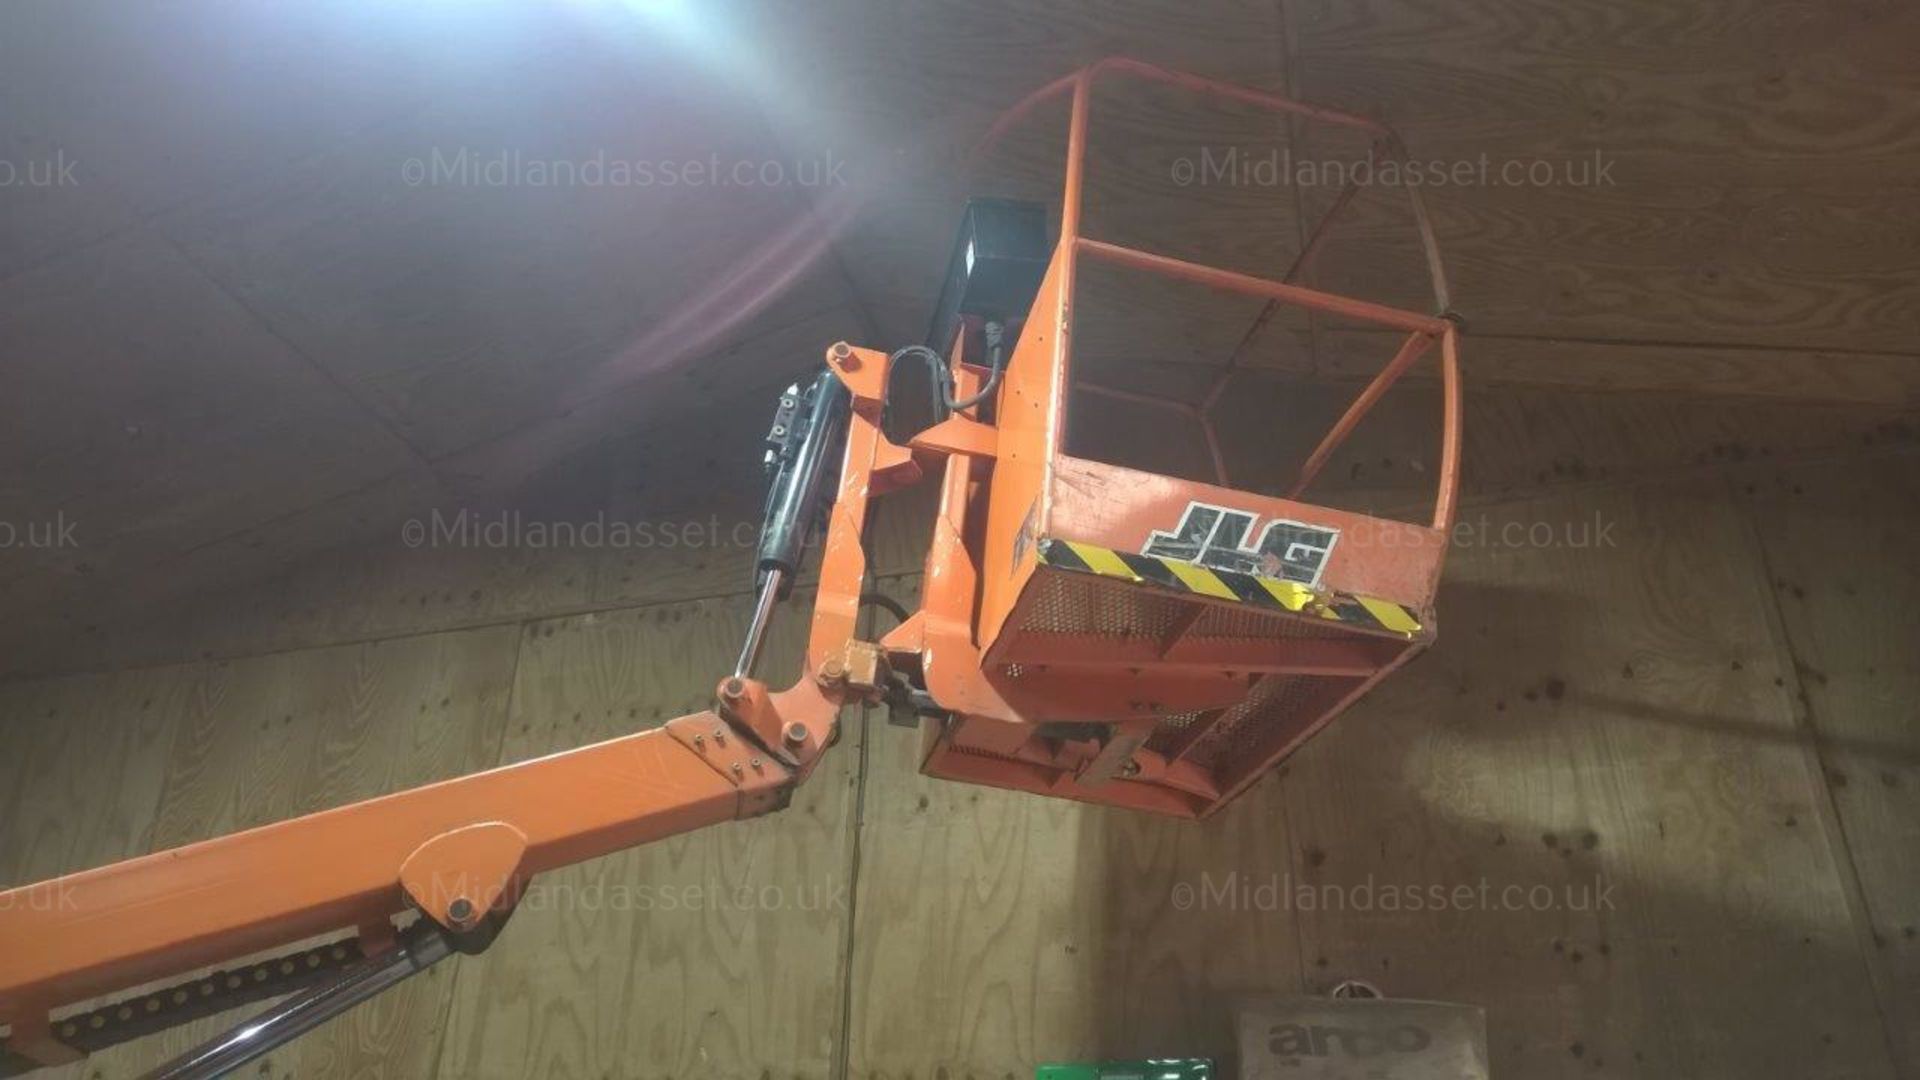 DS - 2005 TOUCAN 1210 ELECTRIC BOOM LIFT   MODEL: 1210 OCCUPANTS: 2 WORKING HEIGHT: 12 METRES - Image 2 of 8